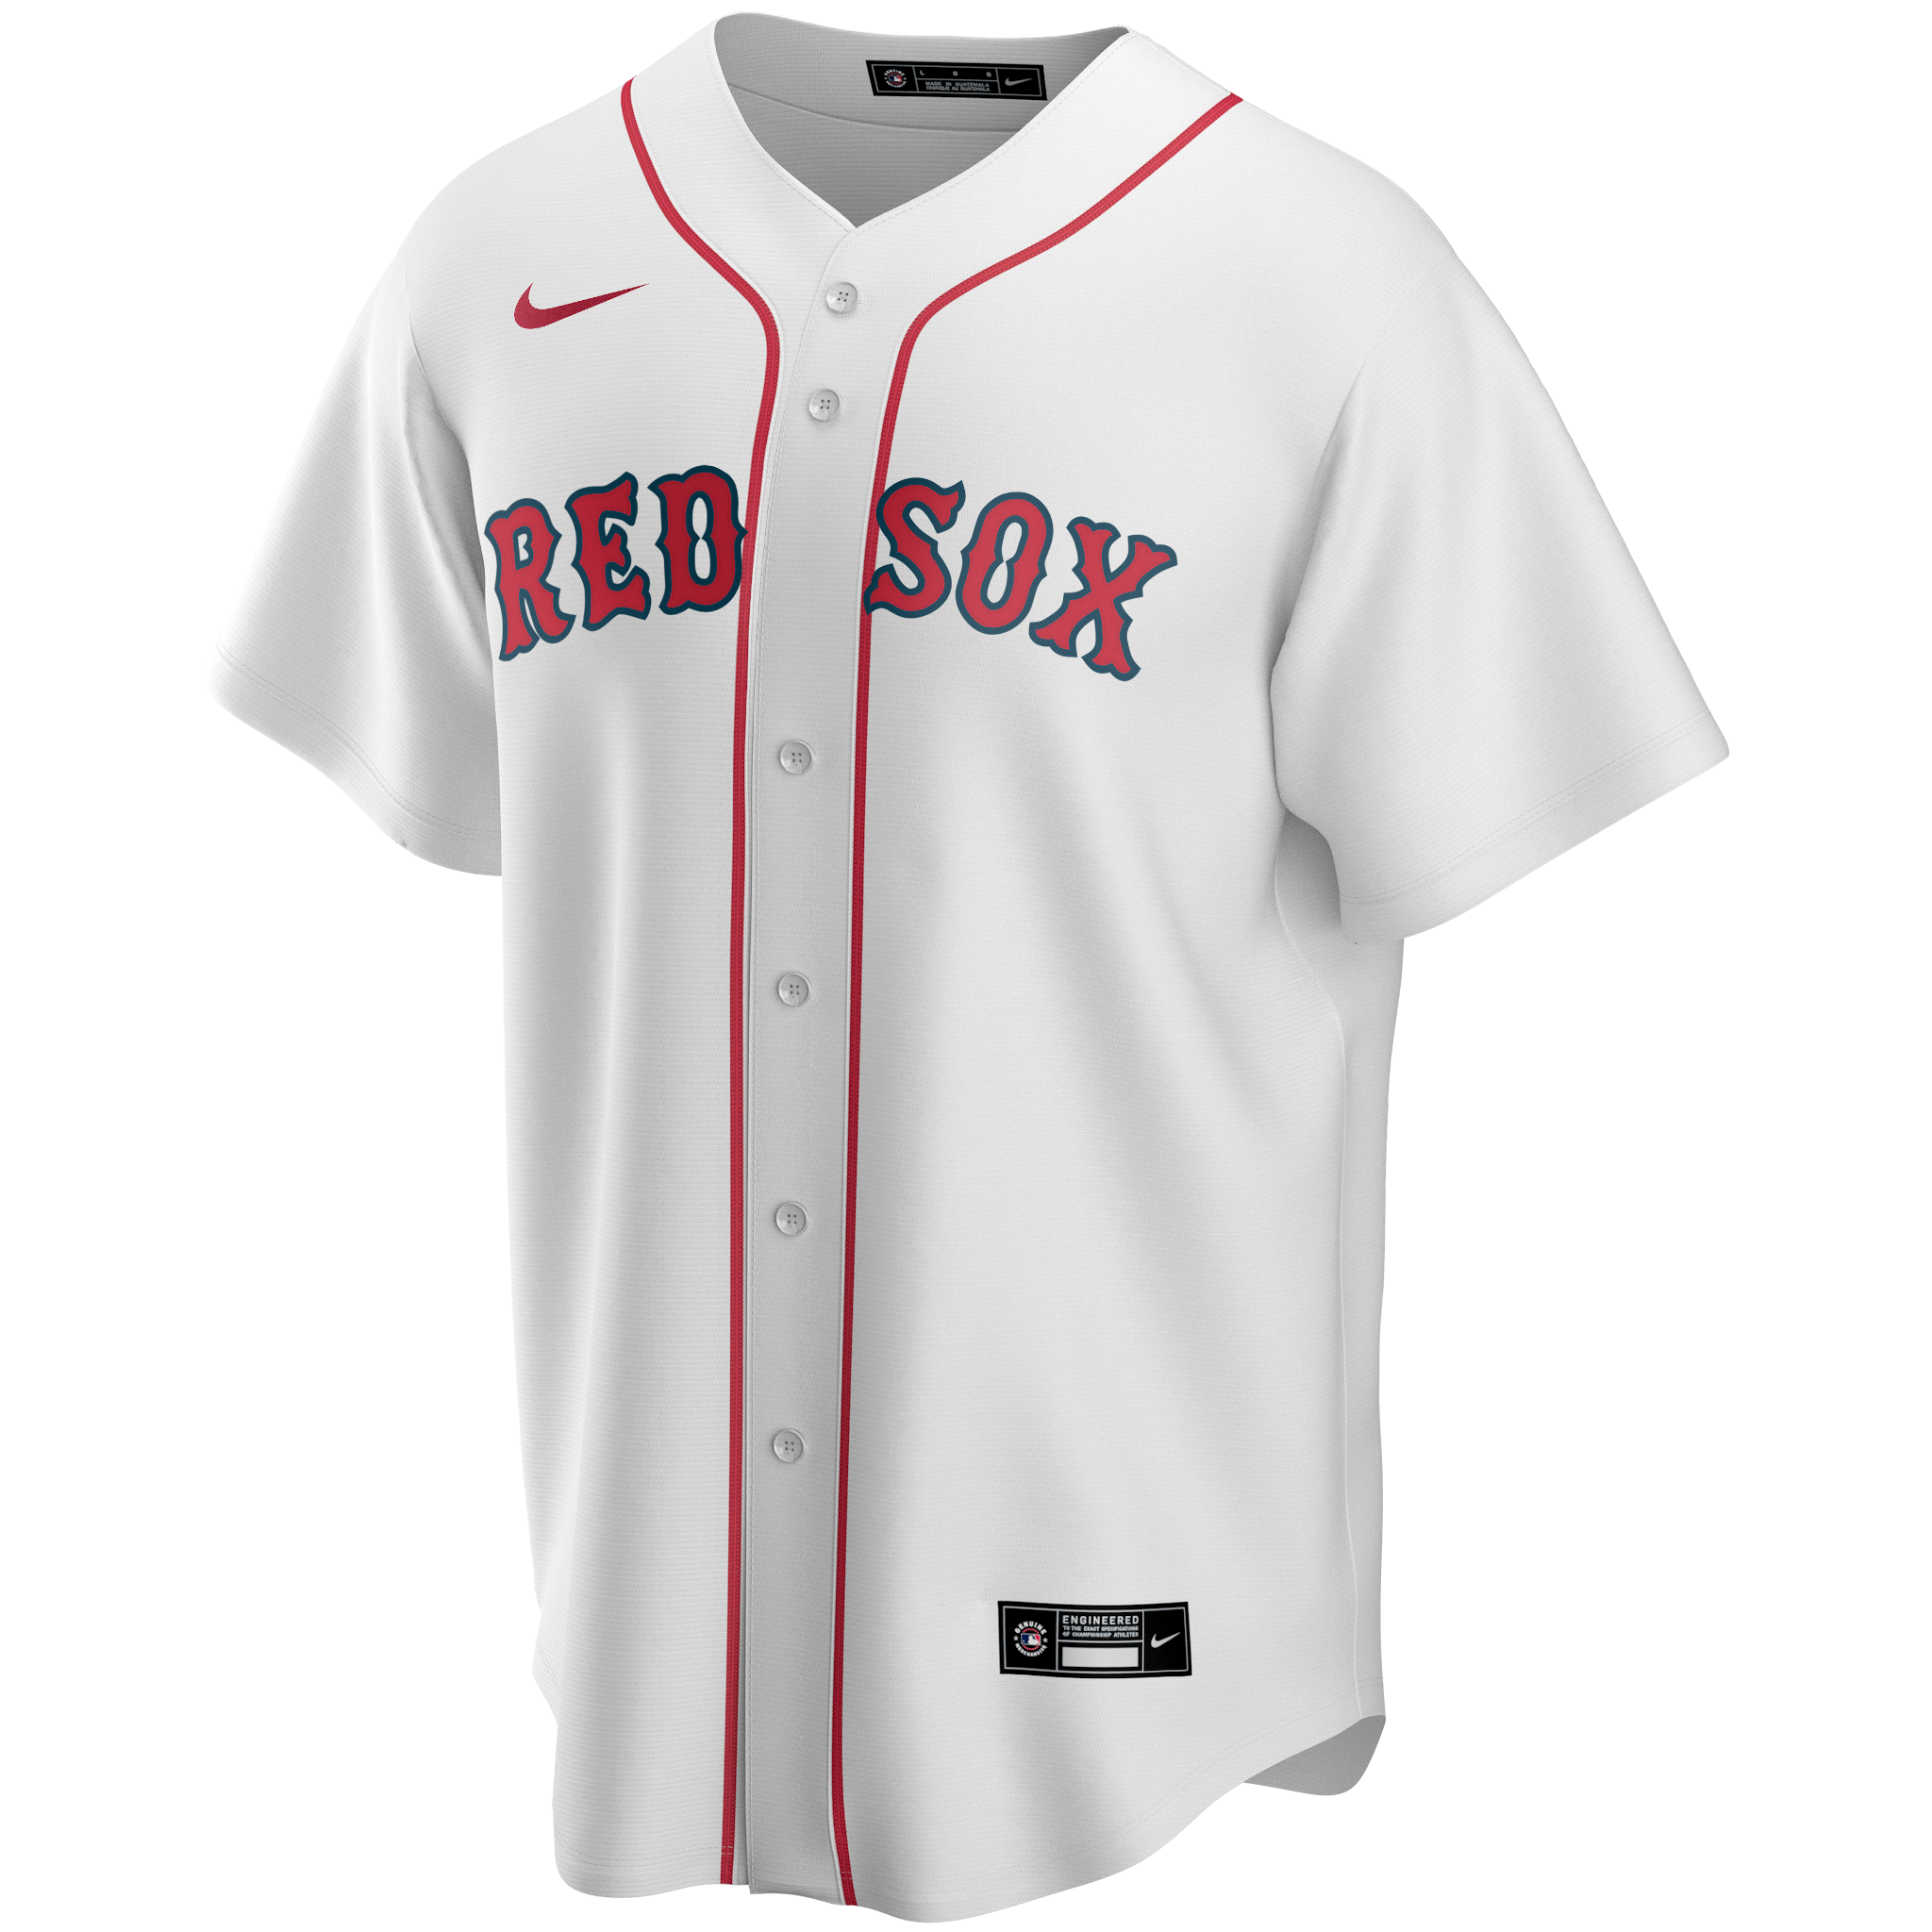 Chris Sale Red Sox Home Jersey